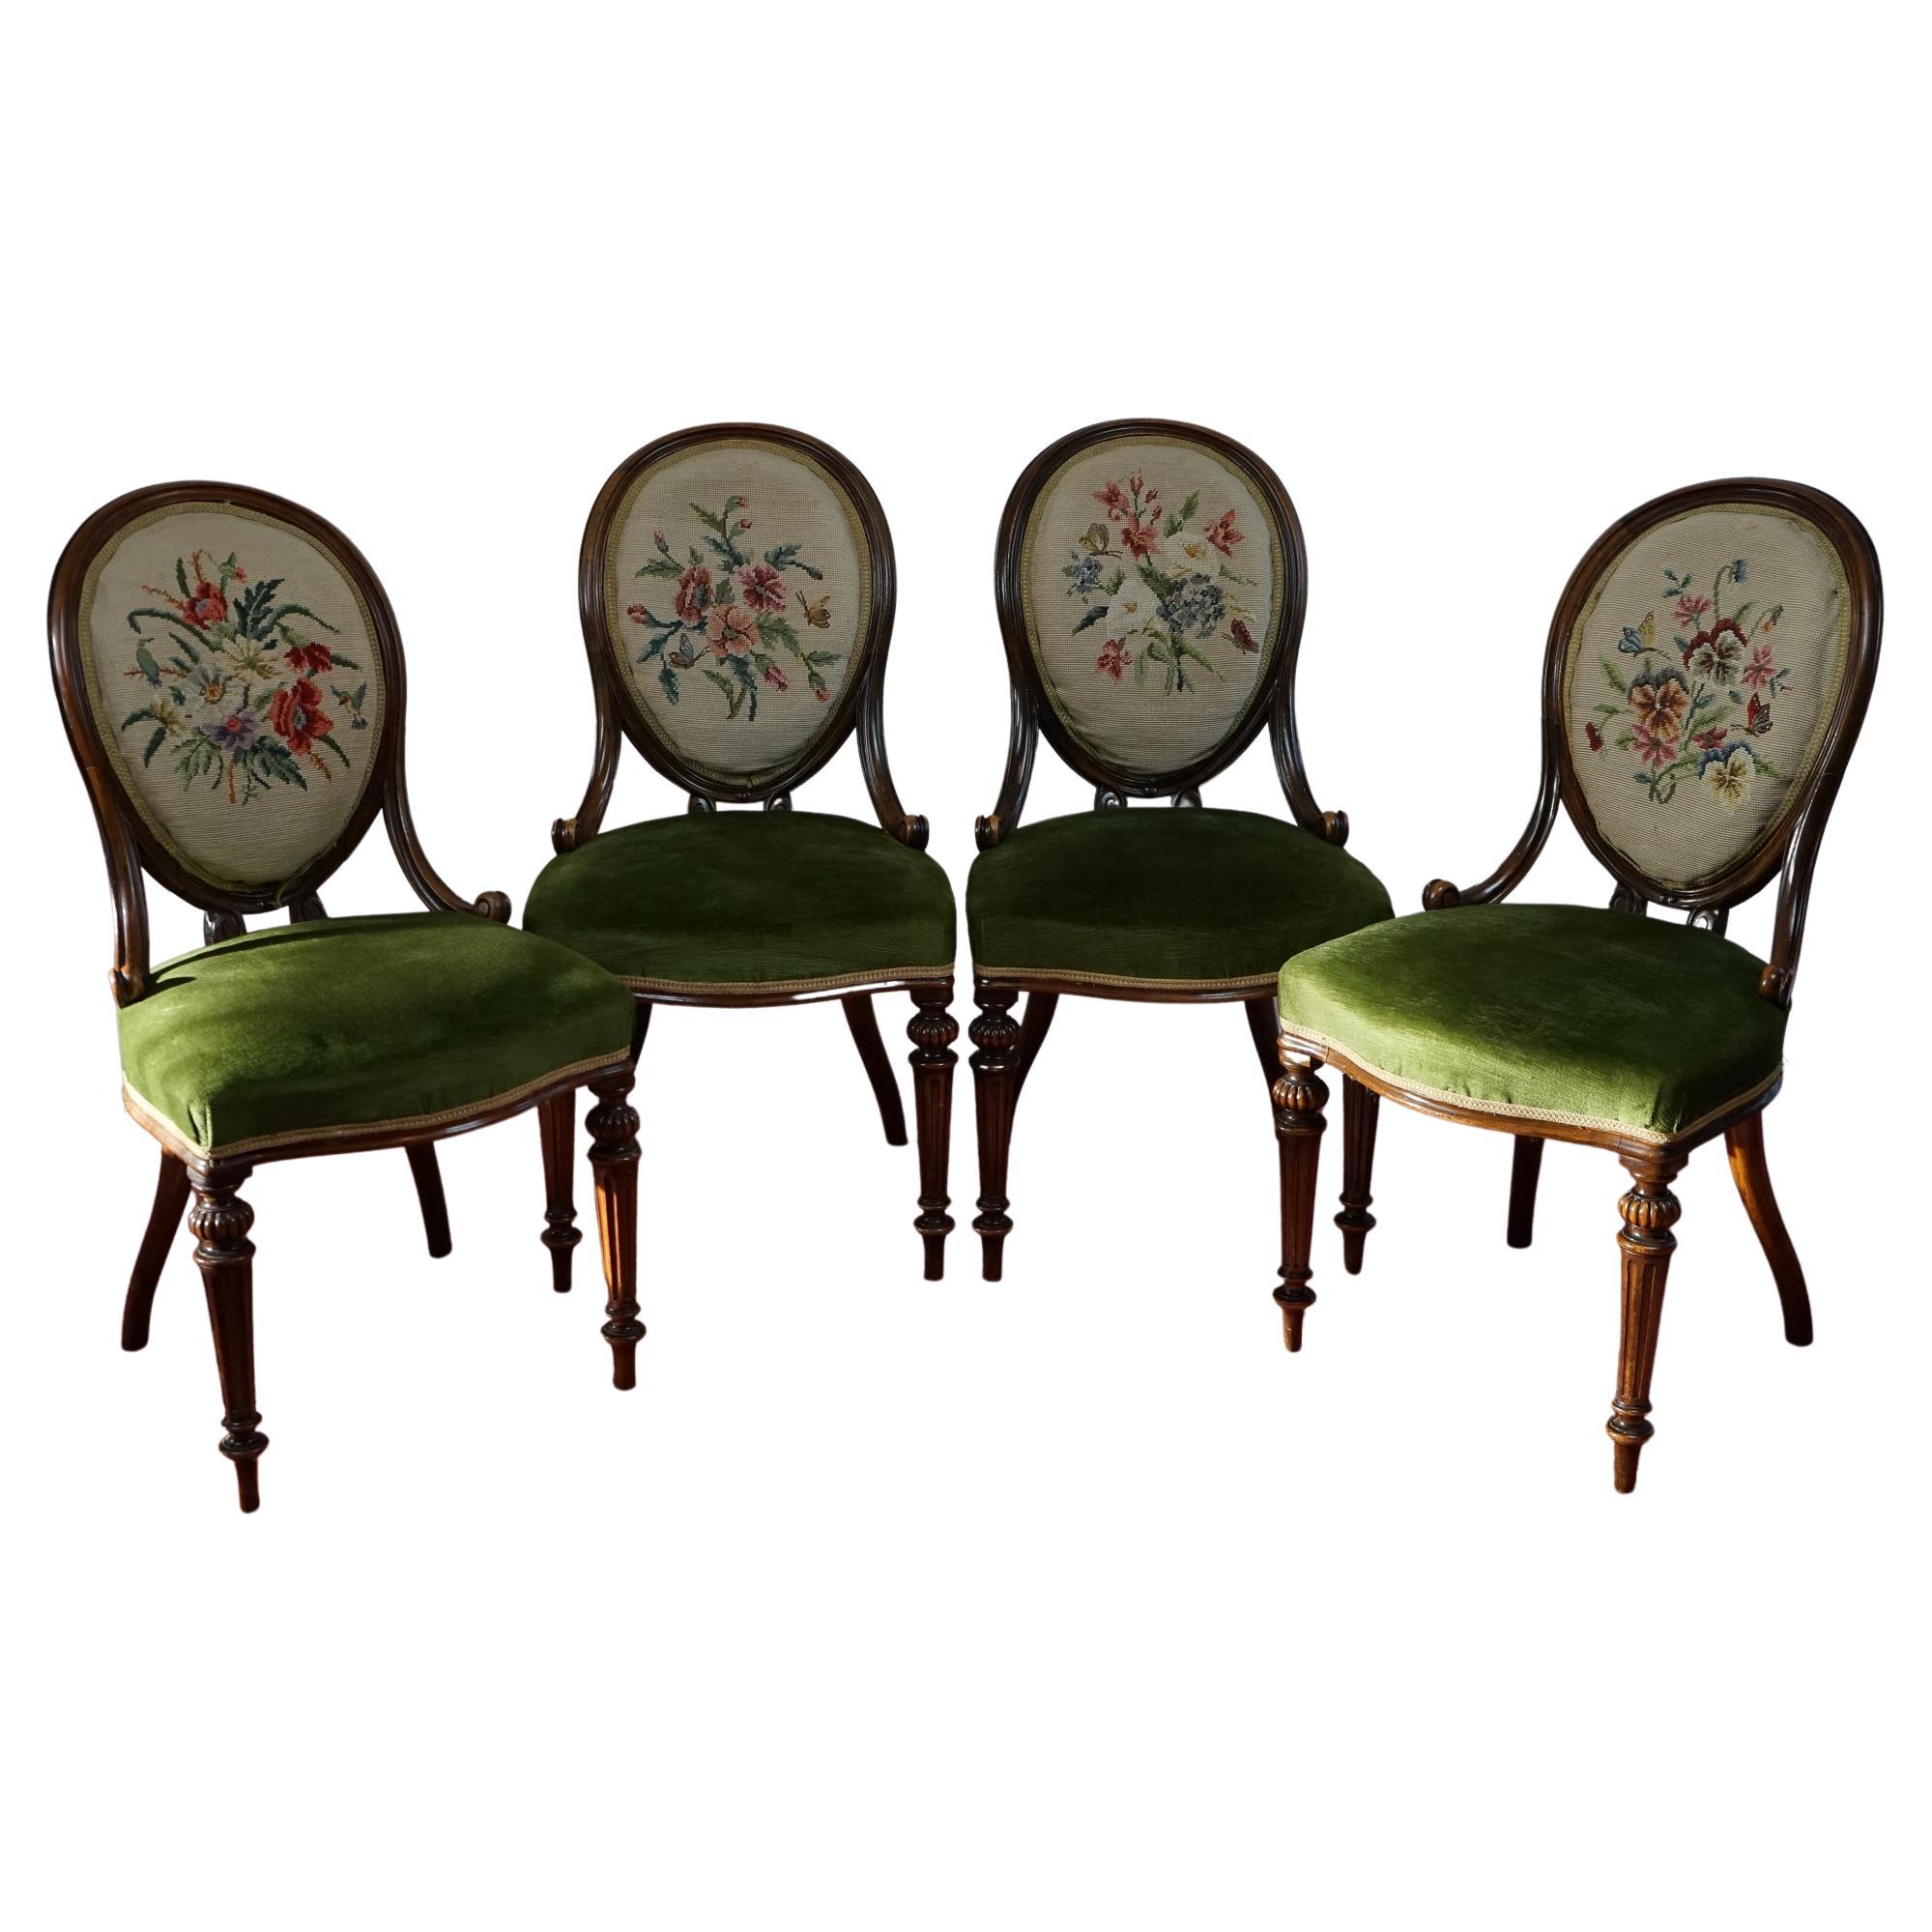 Unique Set of Four Walnut Framed Dining Chairs by Gillows of Lancaster For Sale